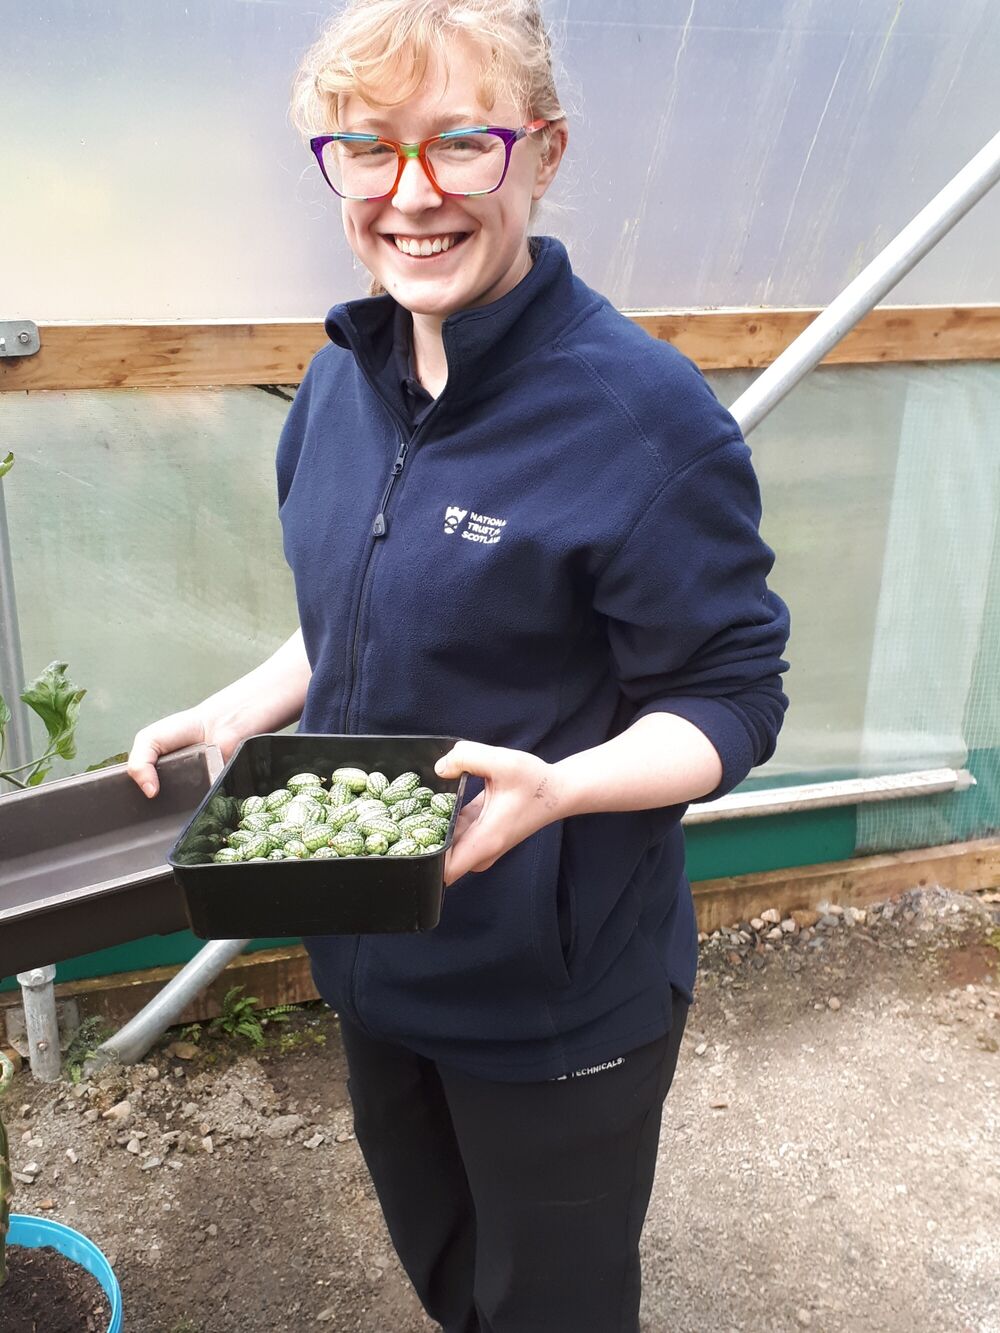 A smiling woman wearing glasses is holding a tray of garden bulbs. She is wearing a National Trust for Scotland fleece.